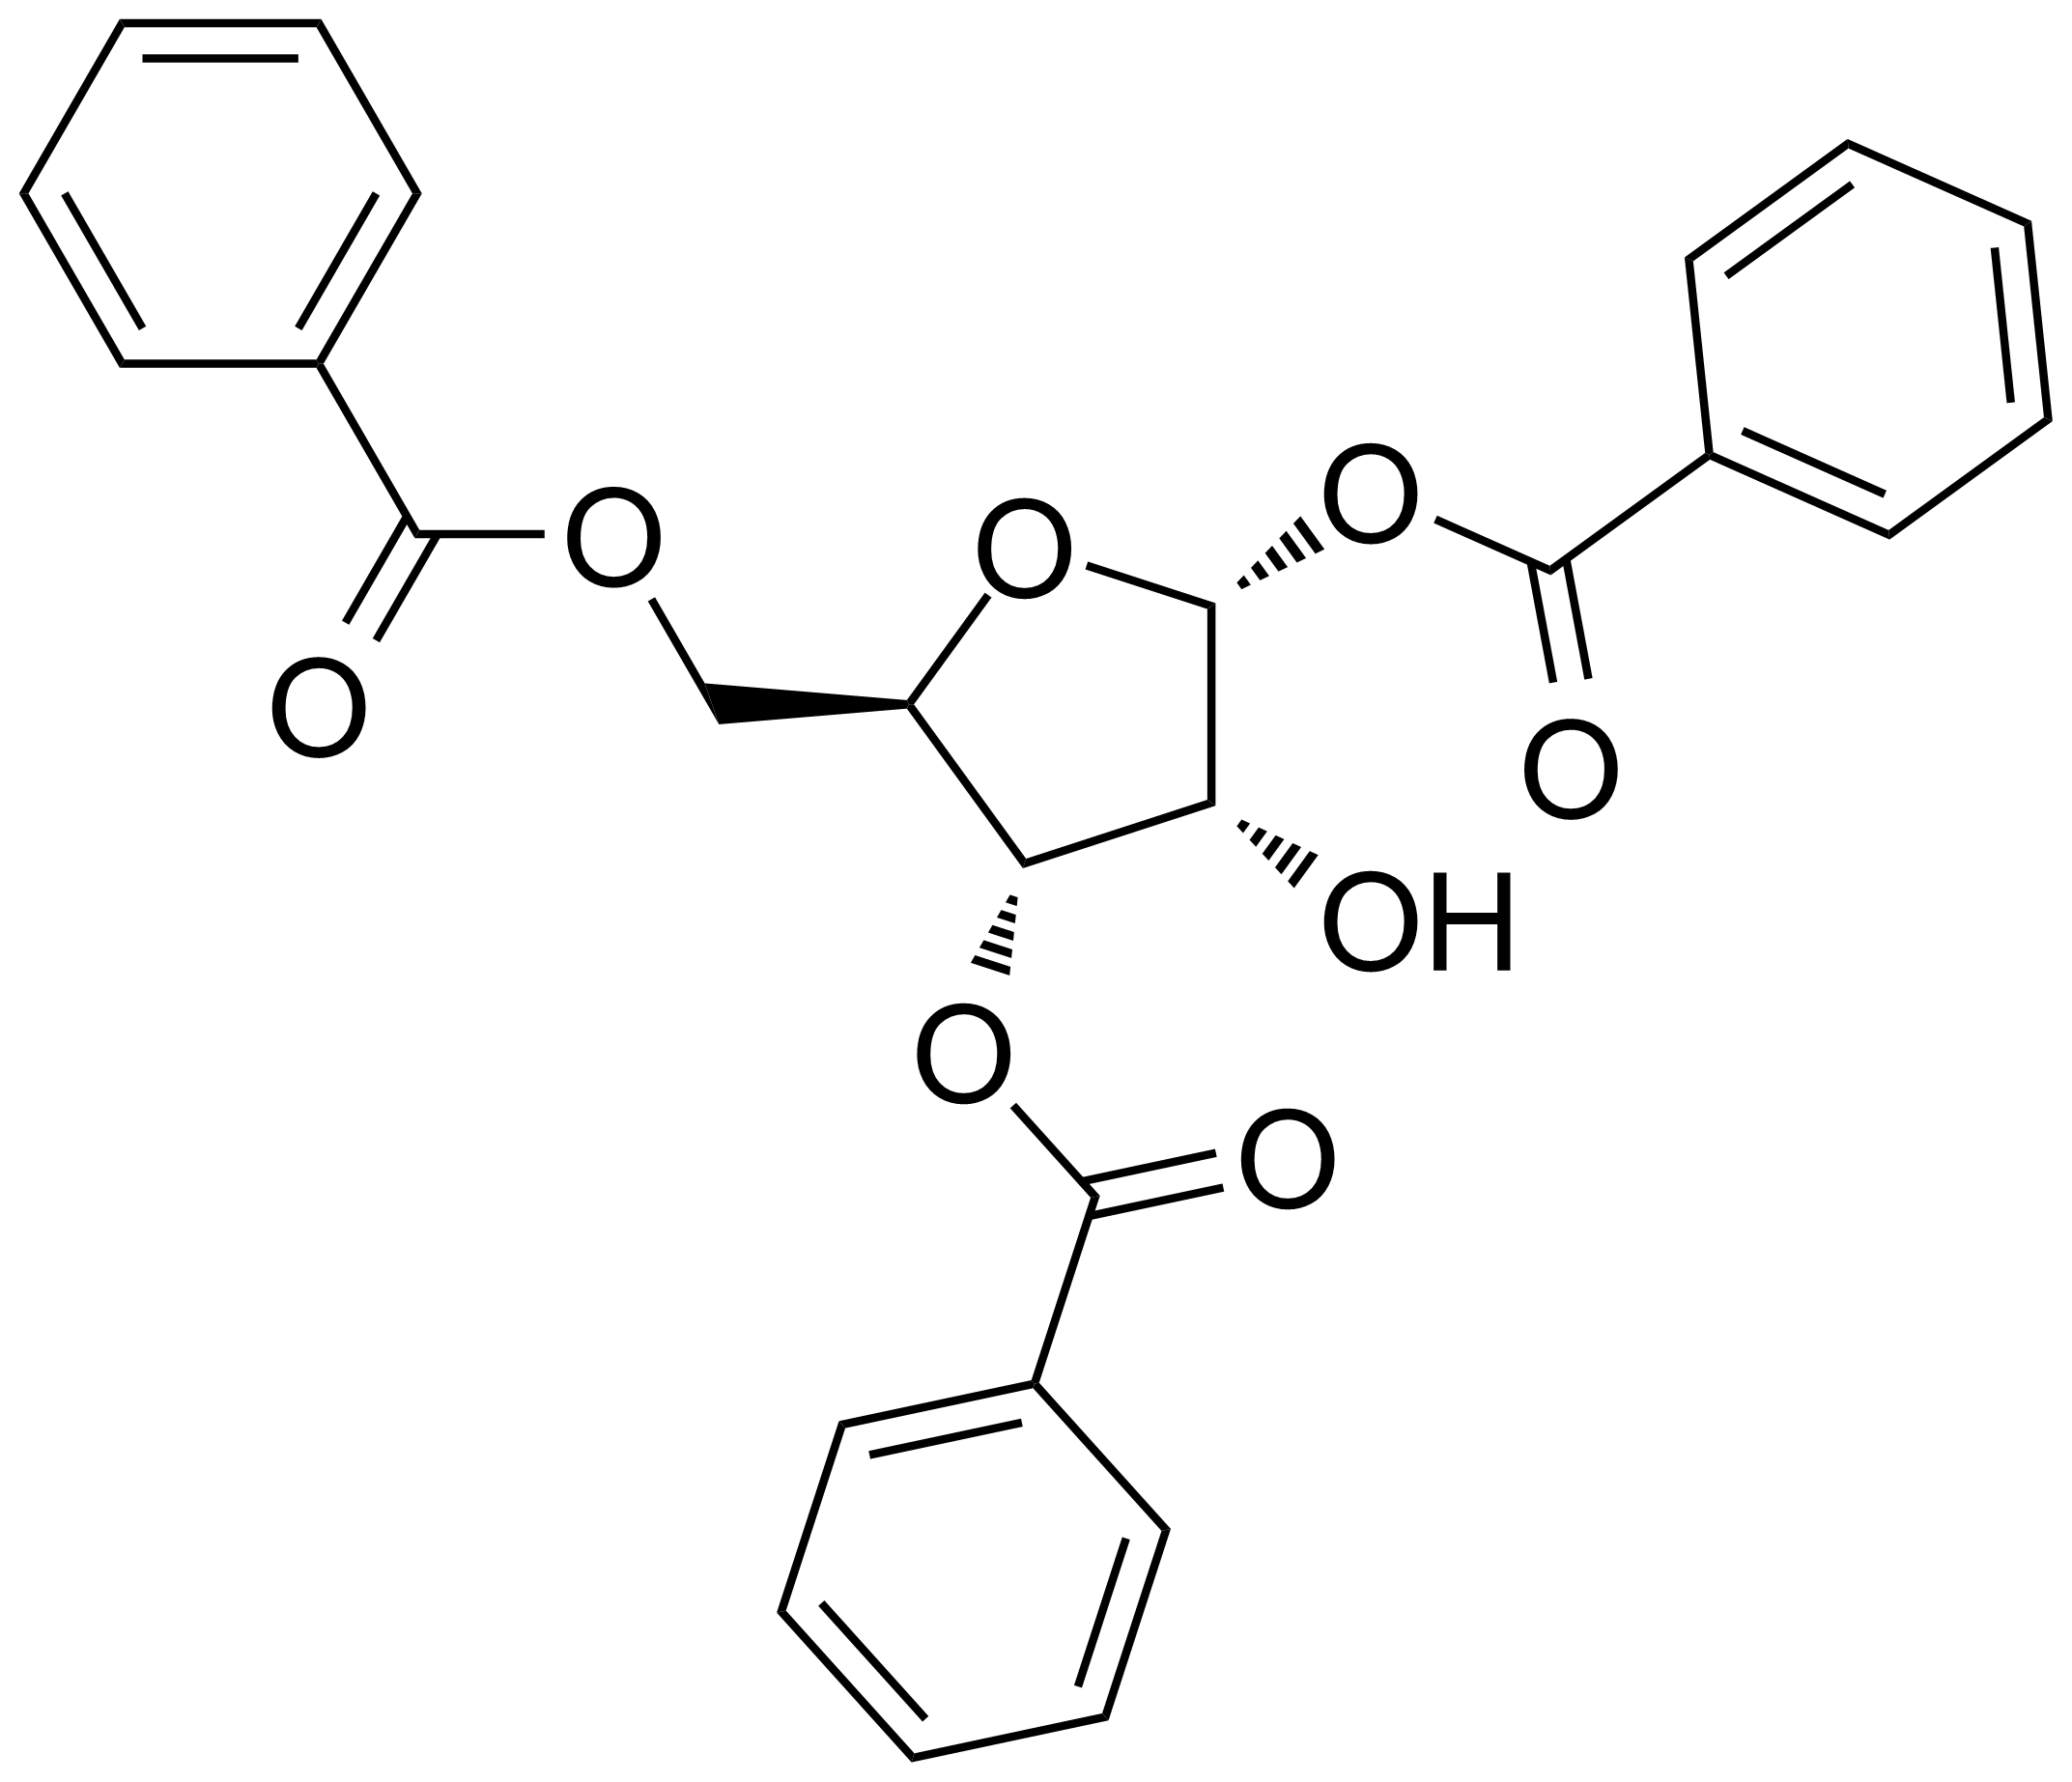 Structure of a-D-Ribofuranose 1,3,5-tribenzoate